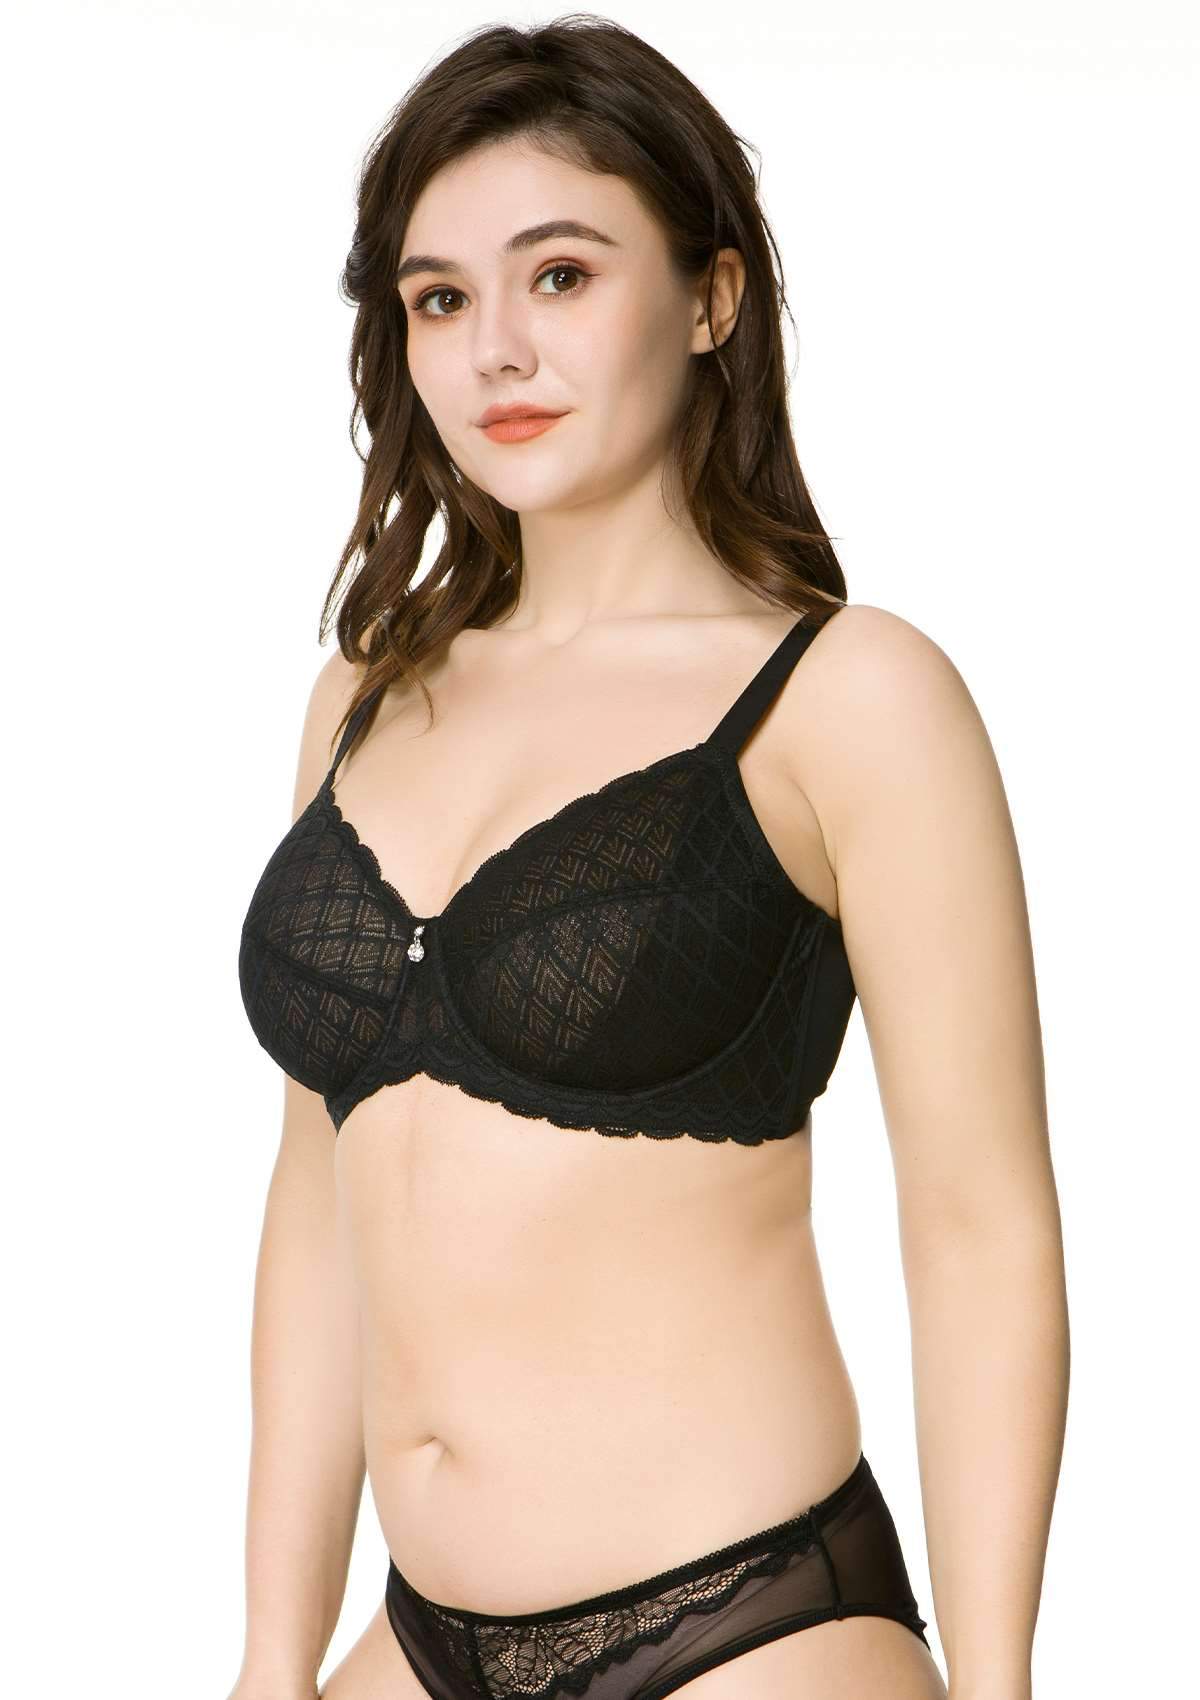 HSIA Plaid Full-Coverage Bra: Soft Bra With Thick Straps - Light Pink / 36 / C